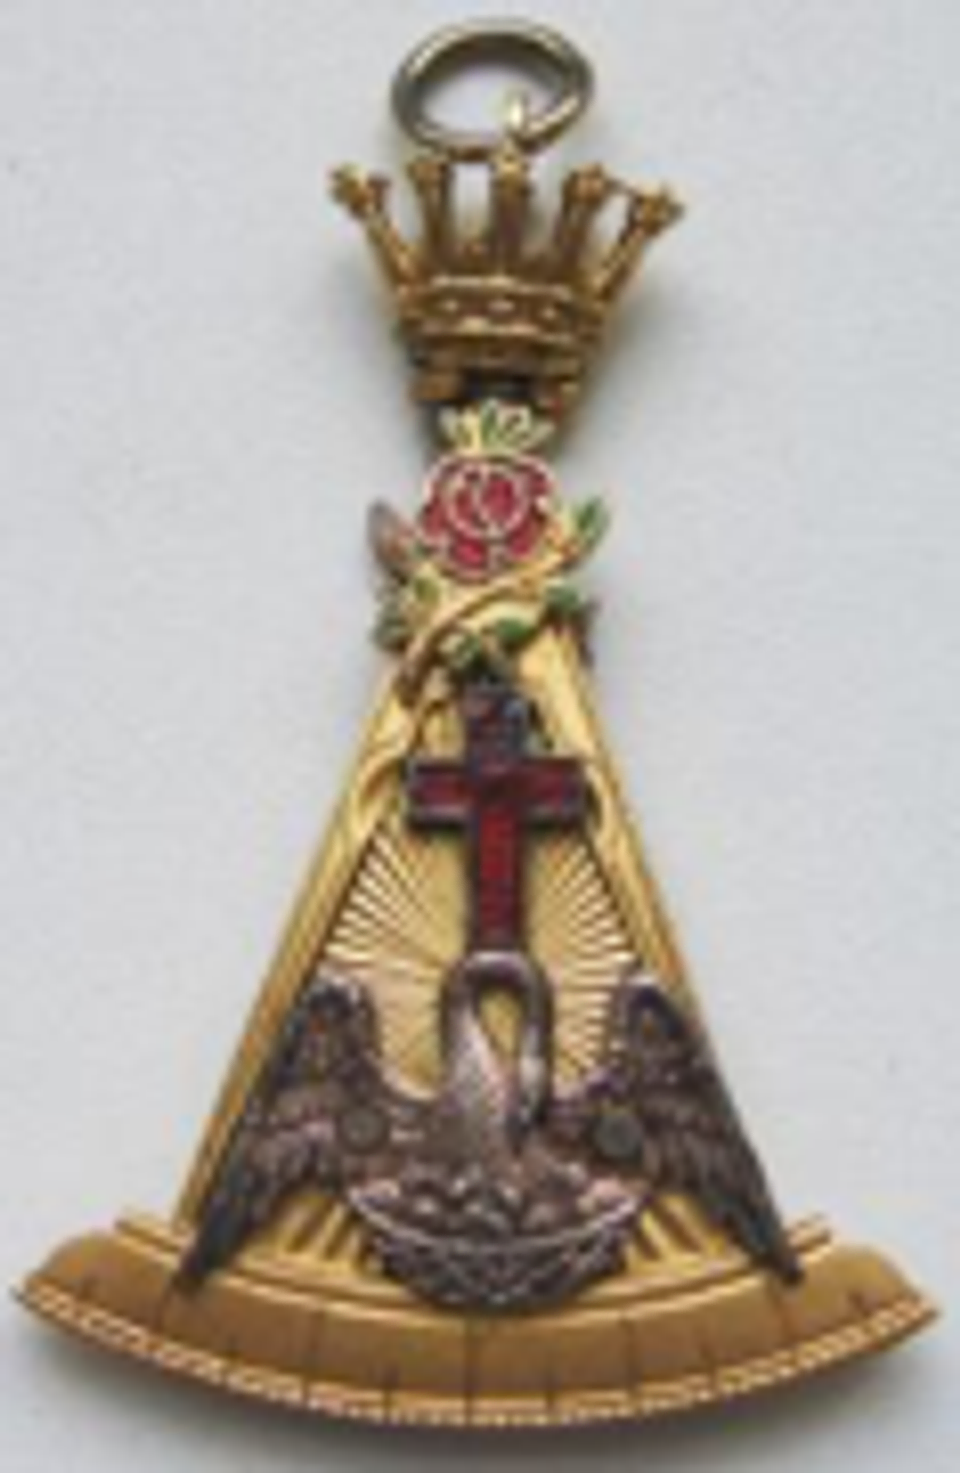 An 18° jewel containing symbols of the ritual